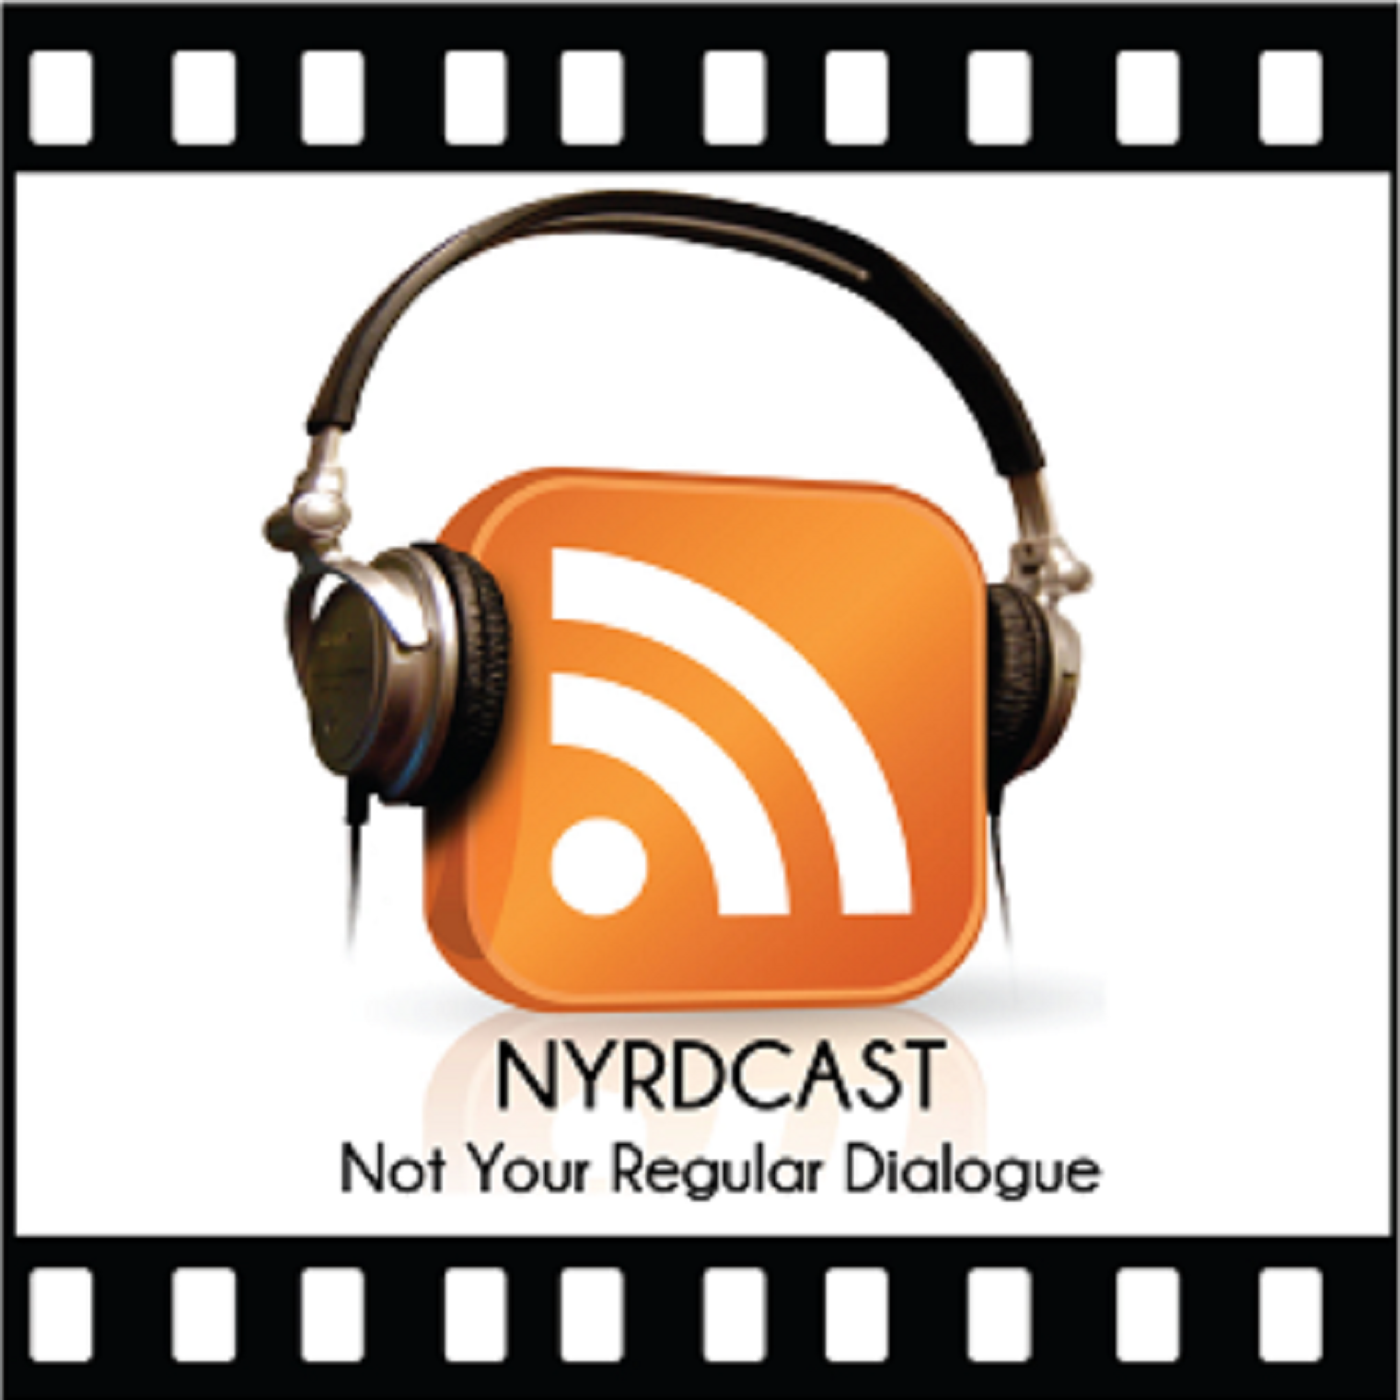 The Nyrdcast Podcast